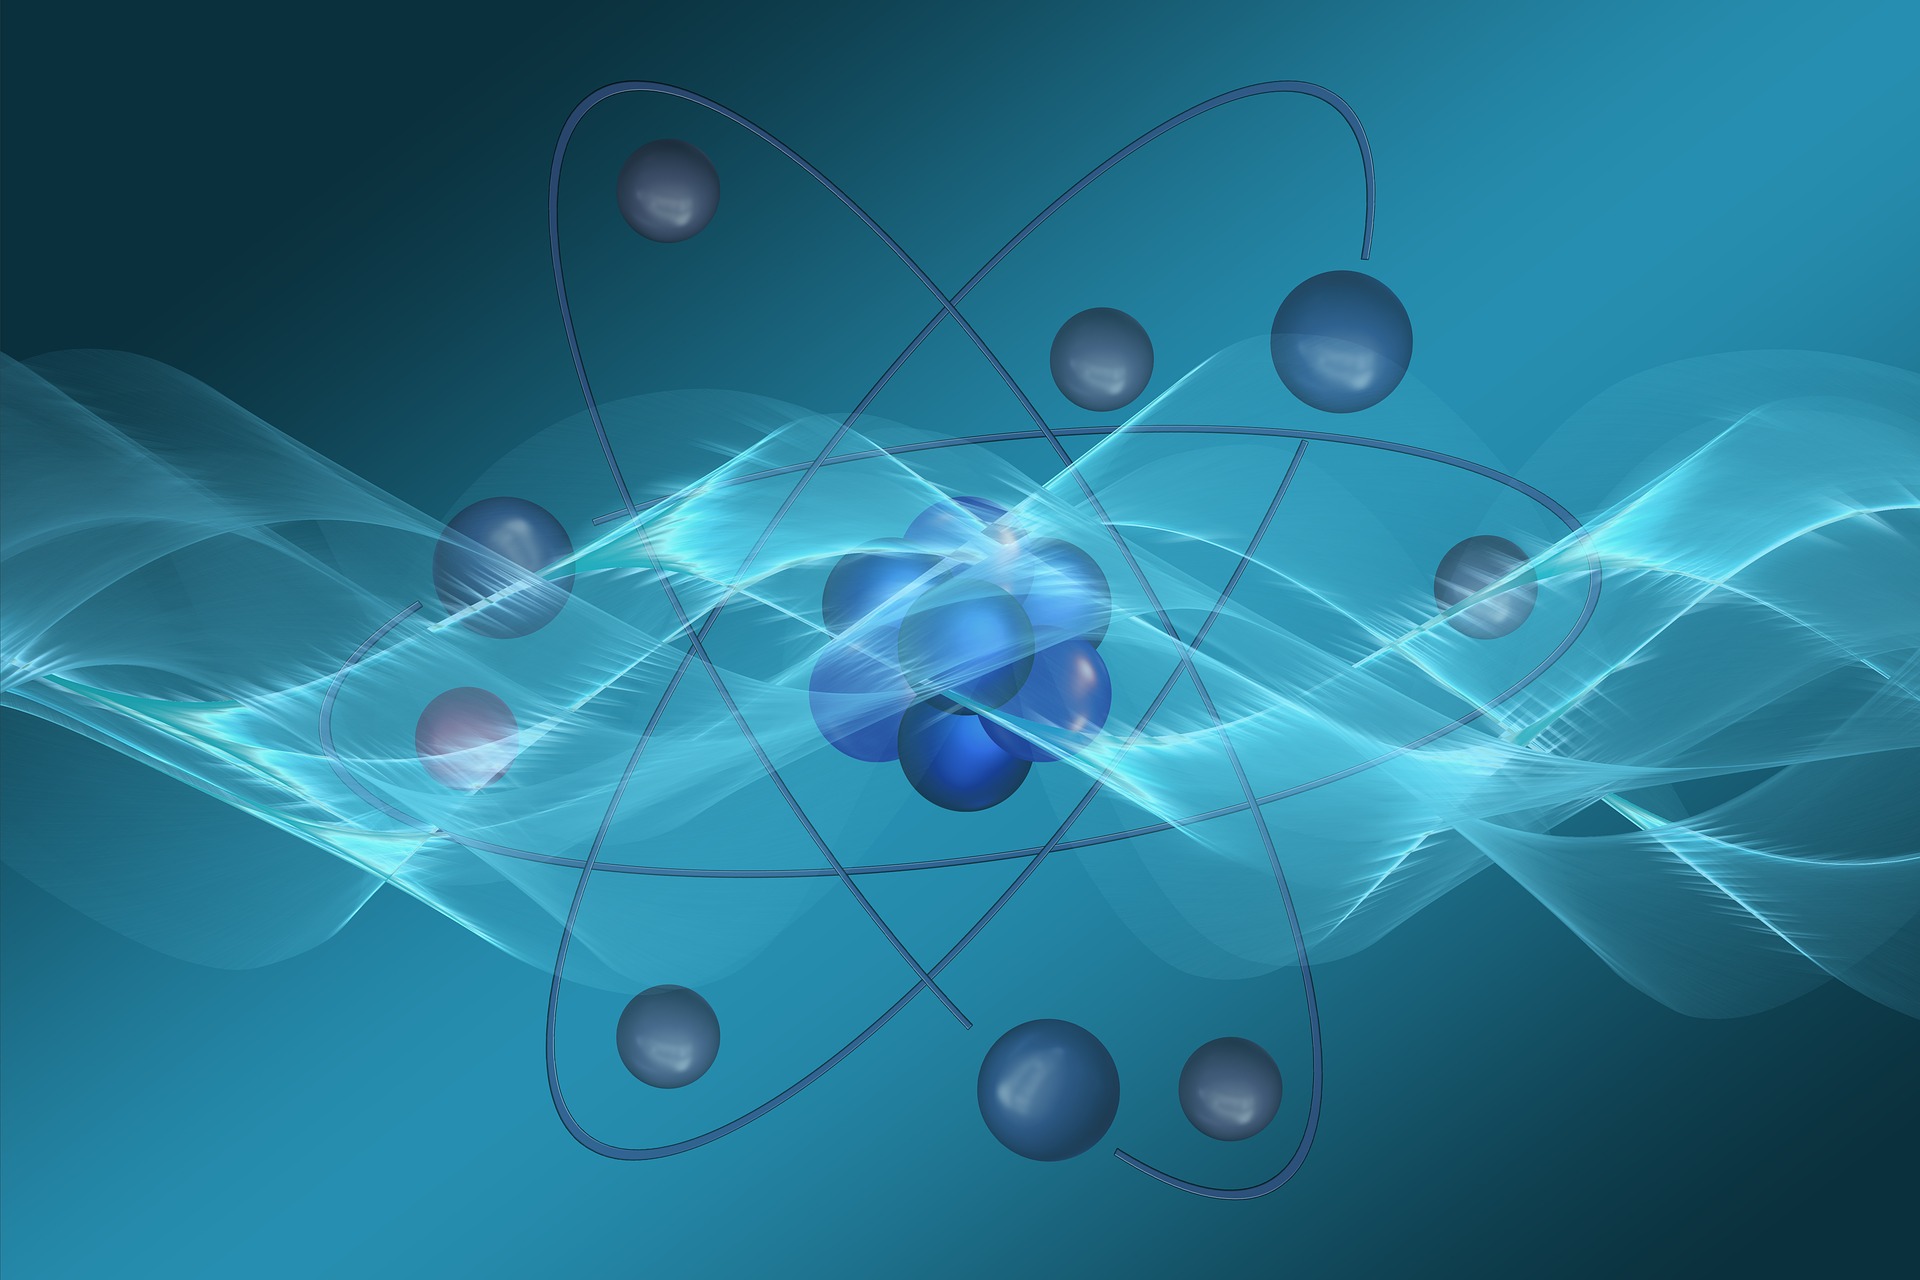 Quantum computer representation by the image of the atom.